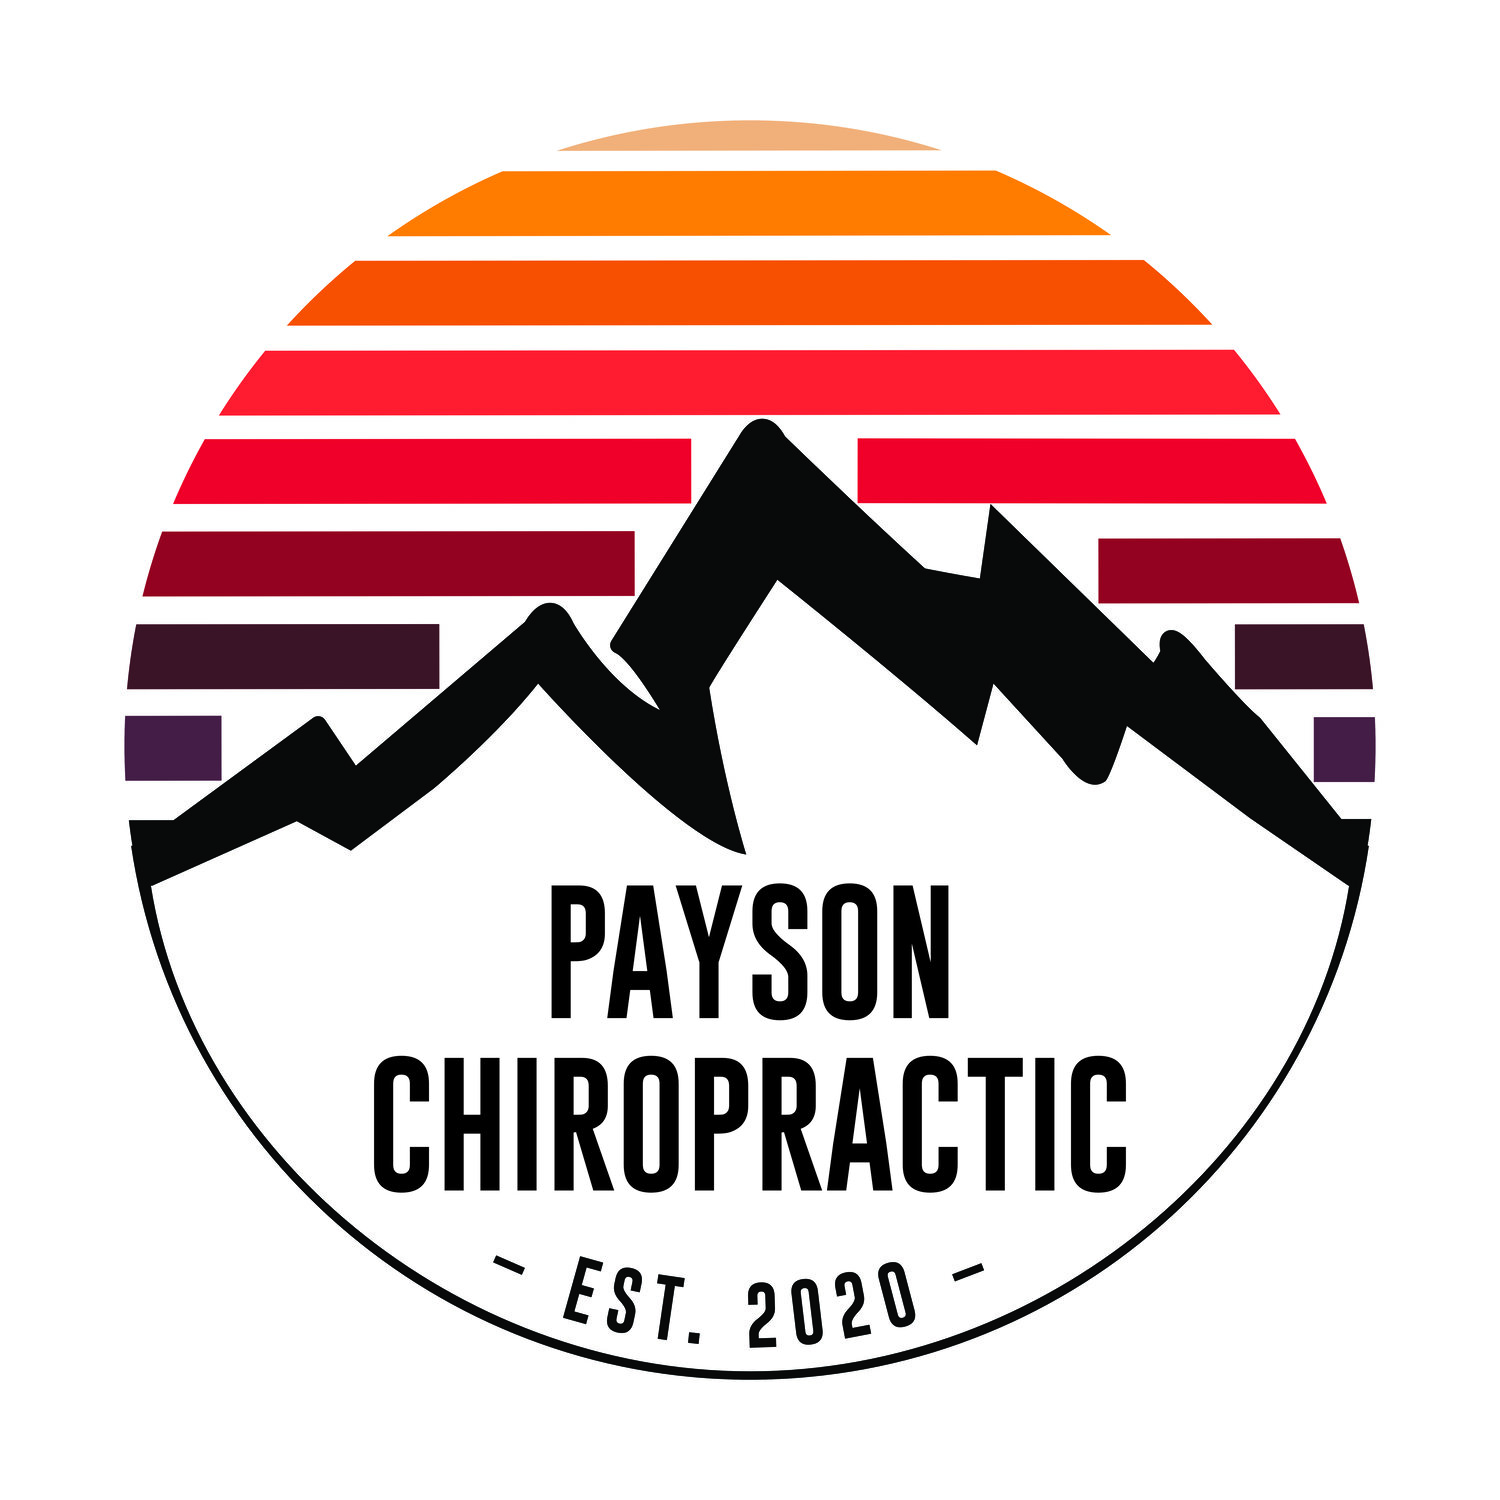 Payson Chiropractic